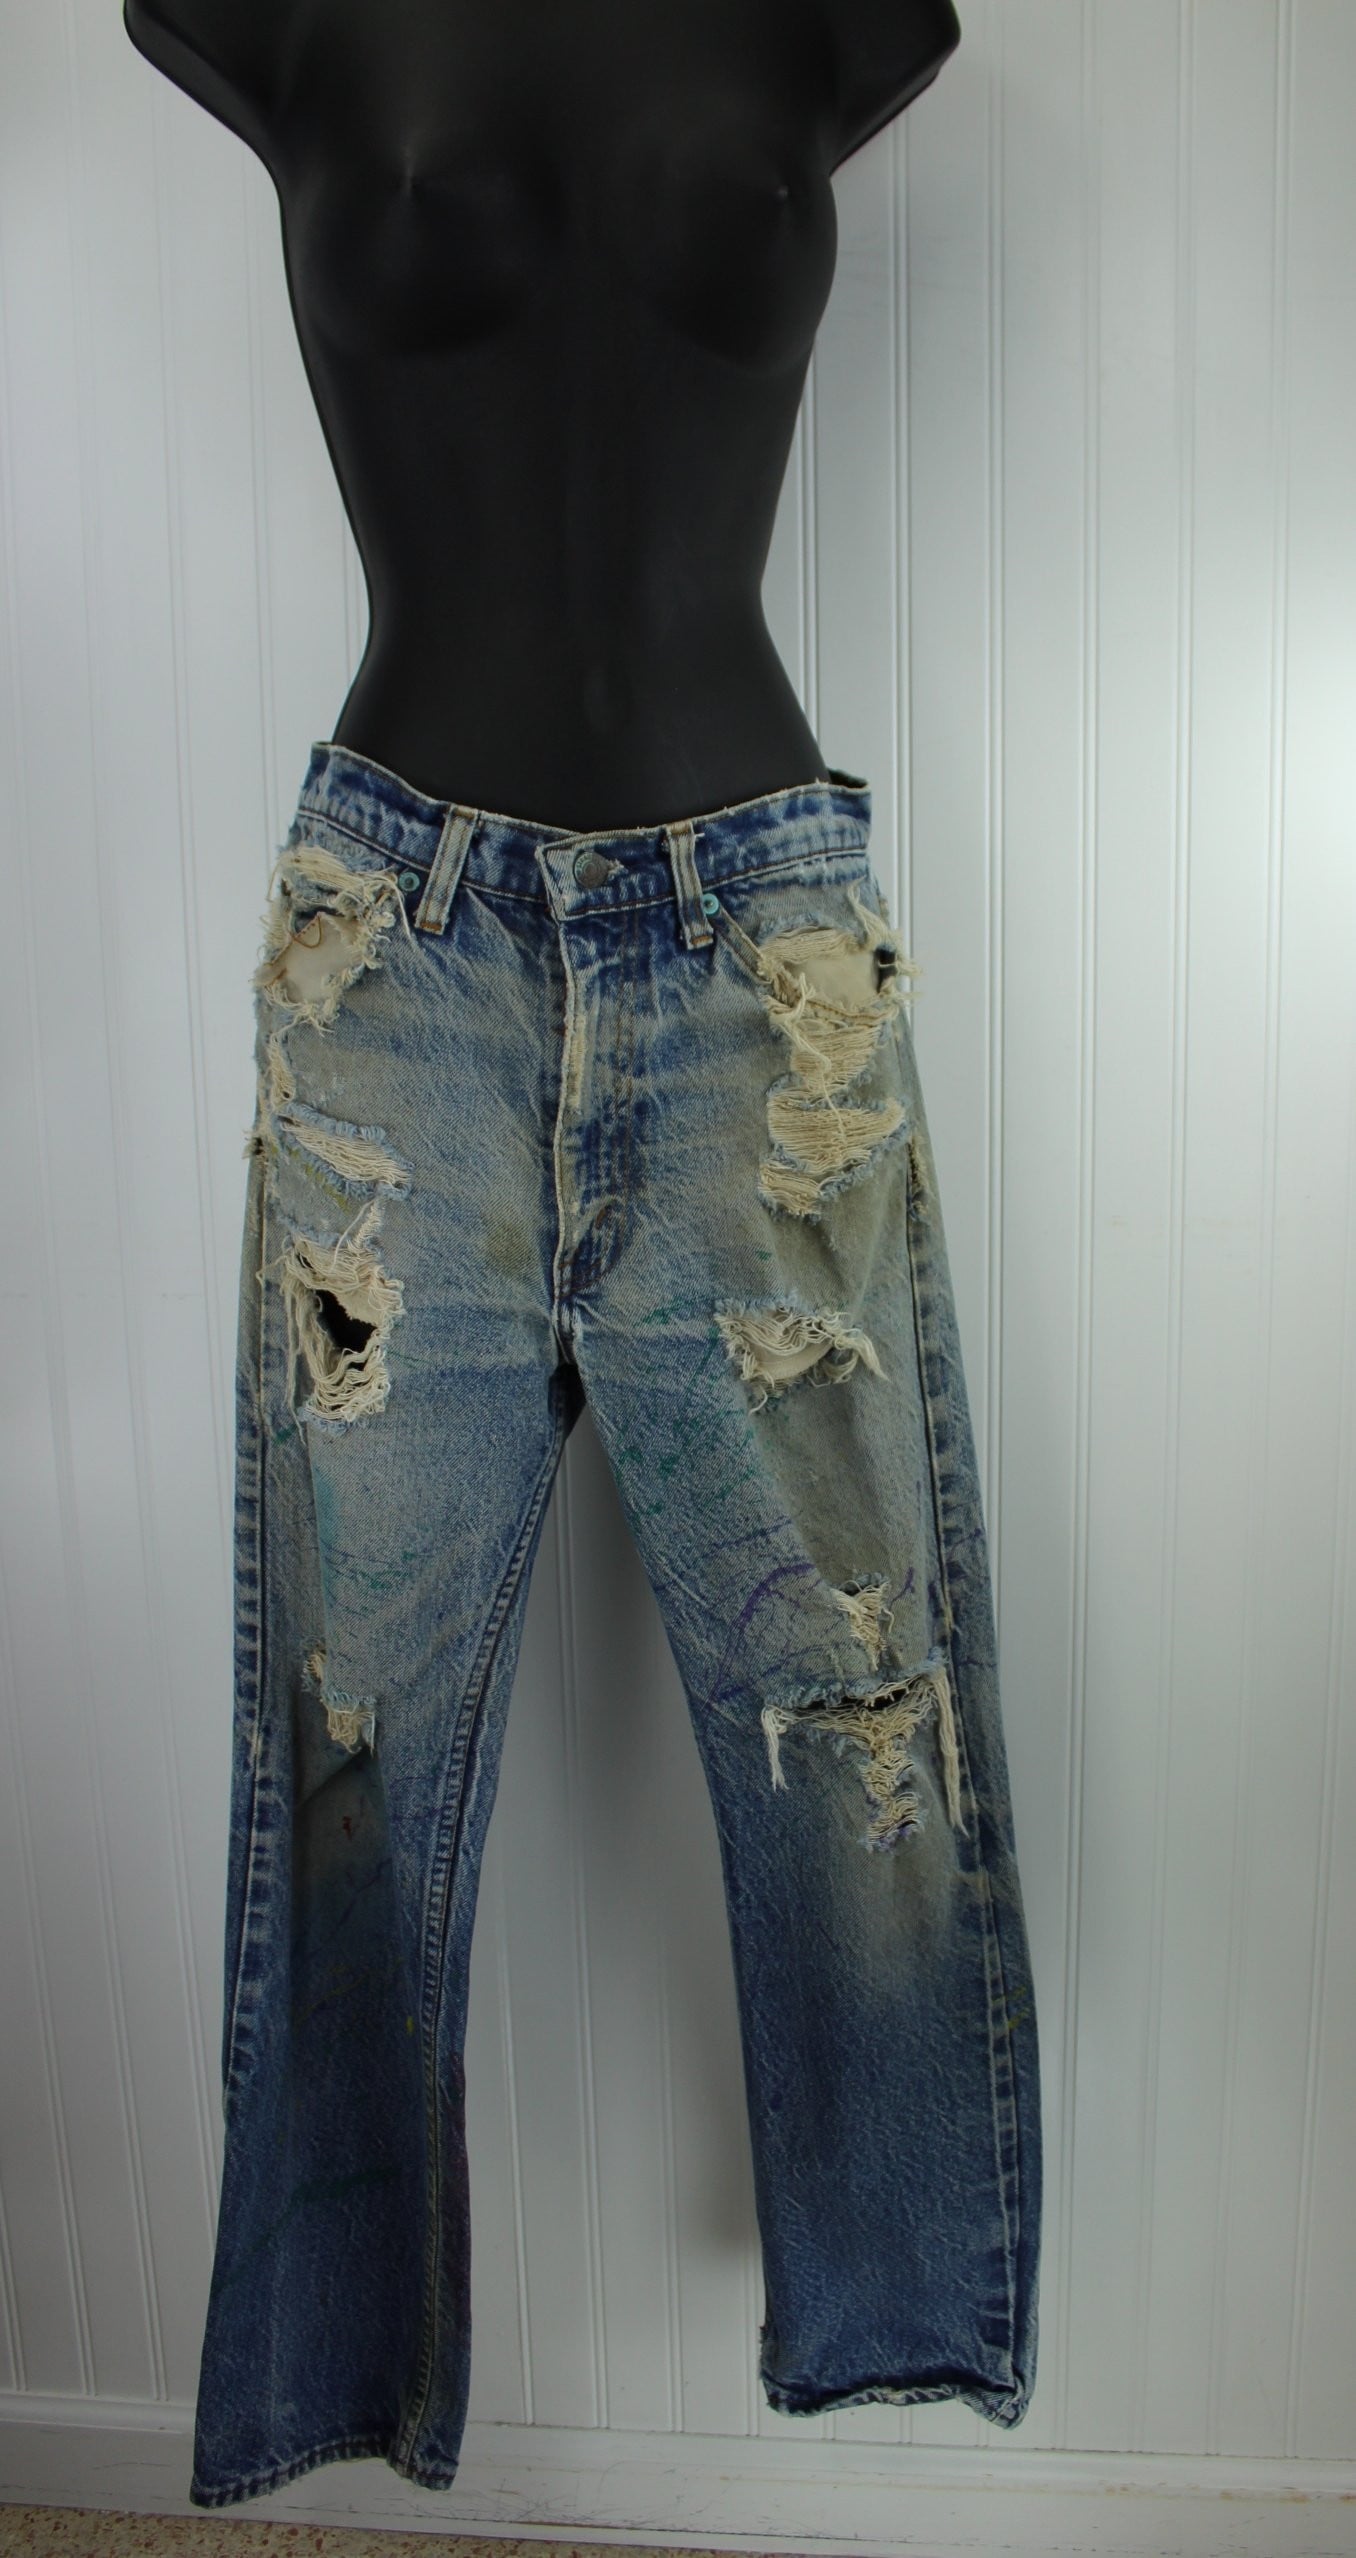 Vintage Levi's Skate Boarder Superbly Distressed Painted Jeans - Early 1990s - Waist 30" Orange Tab